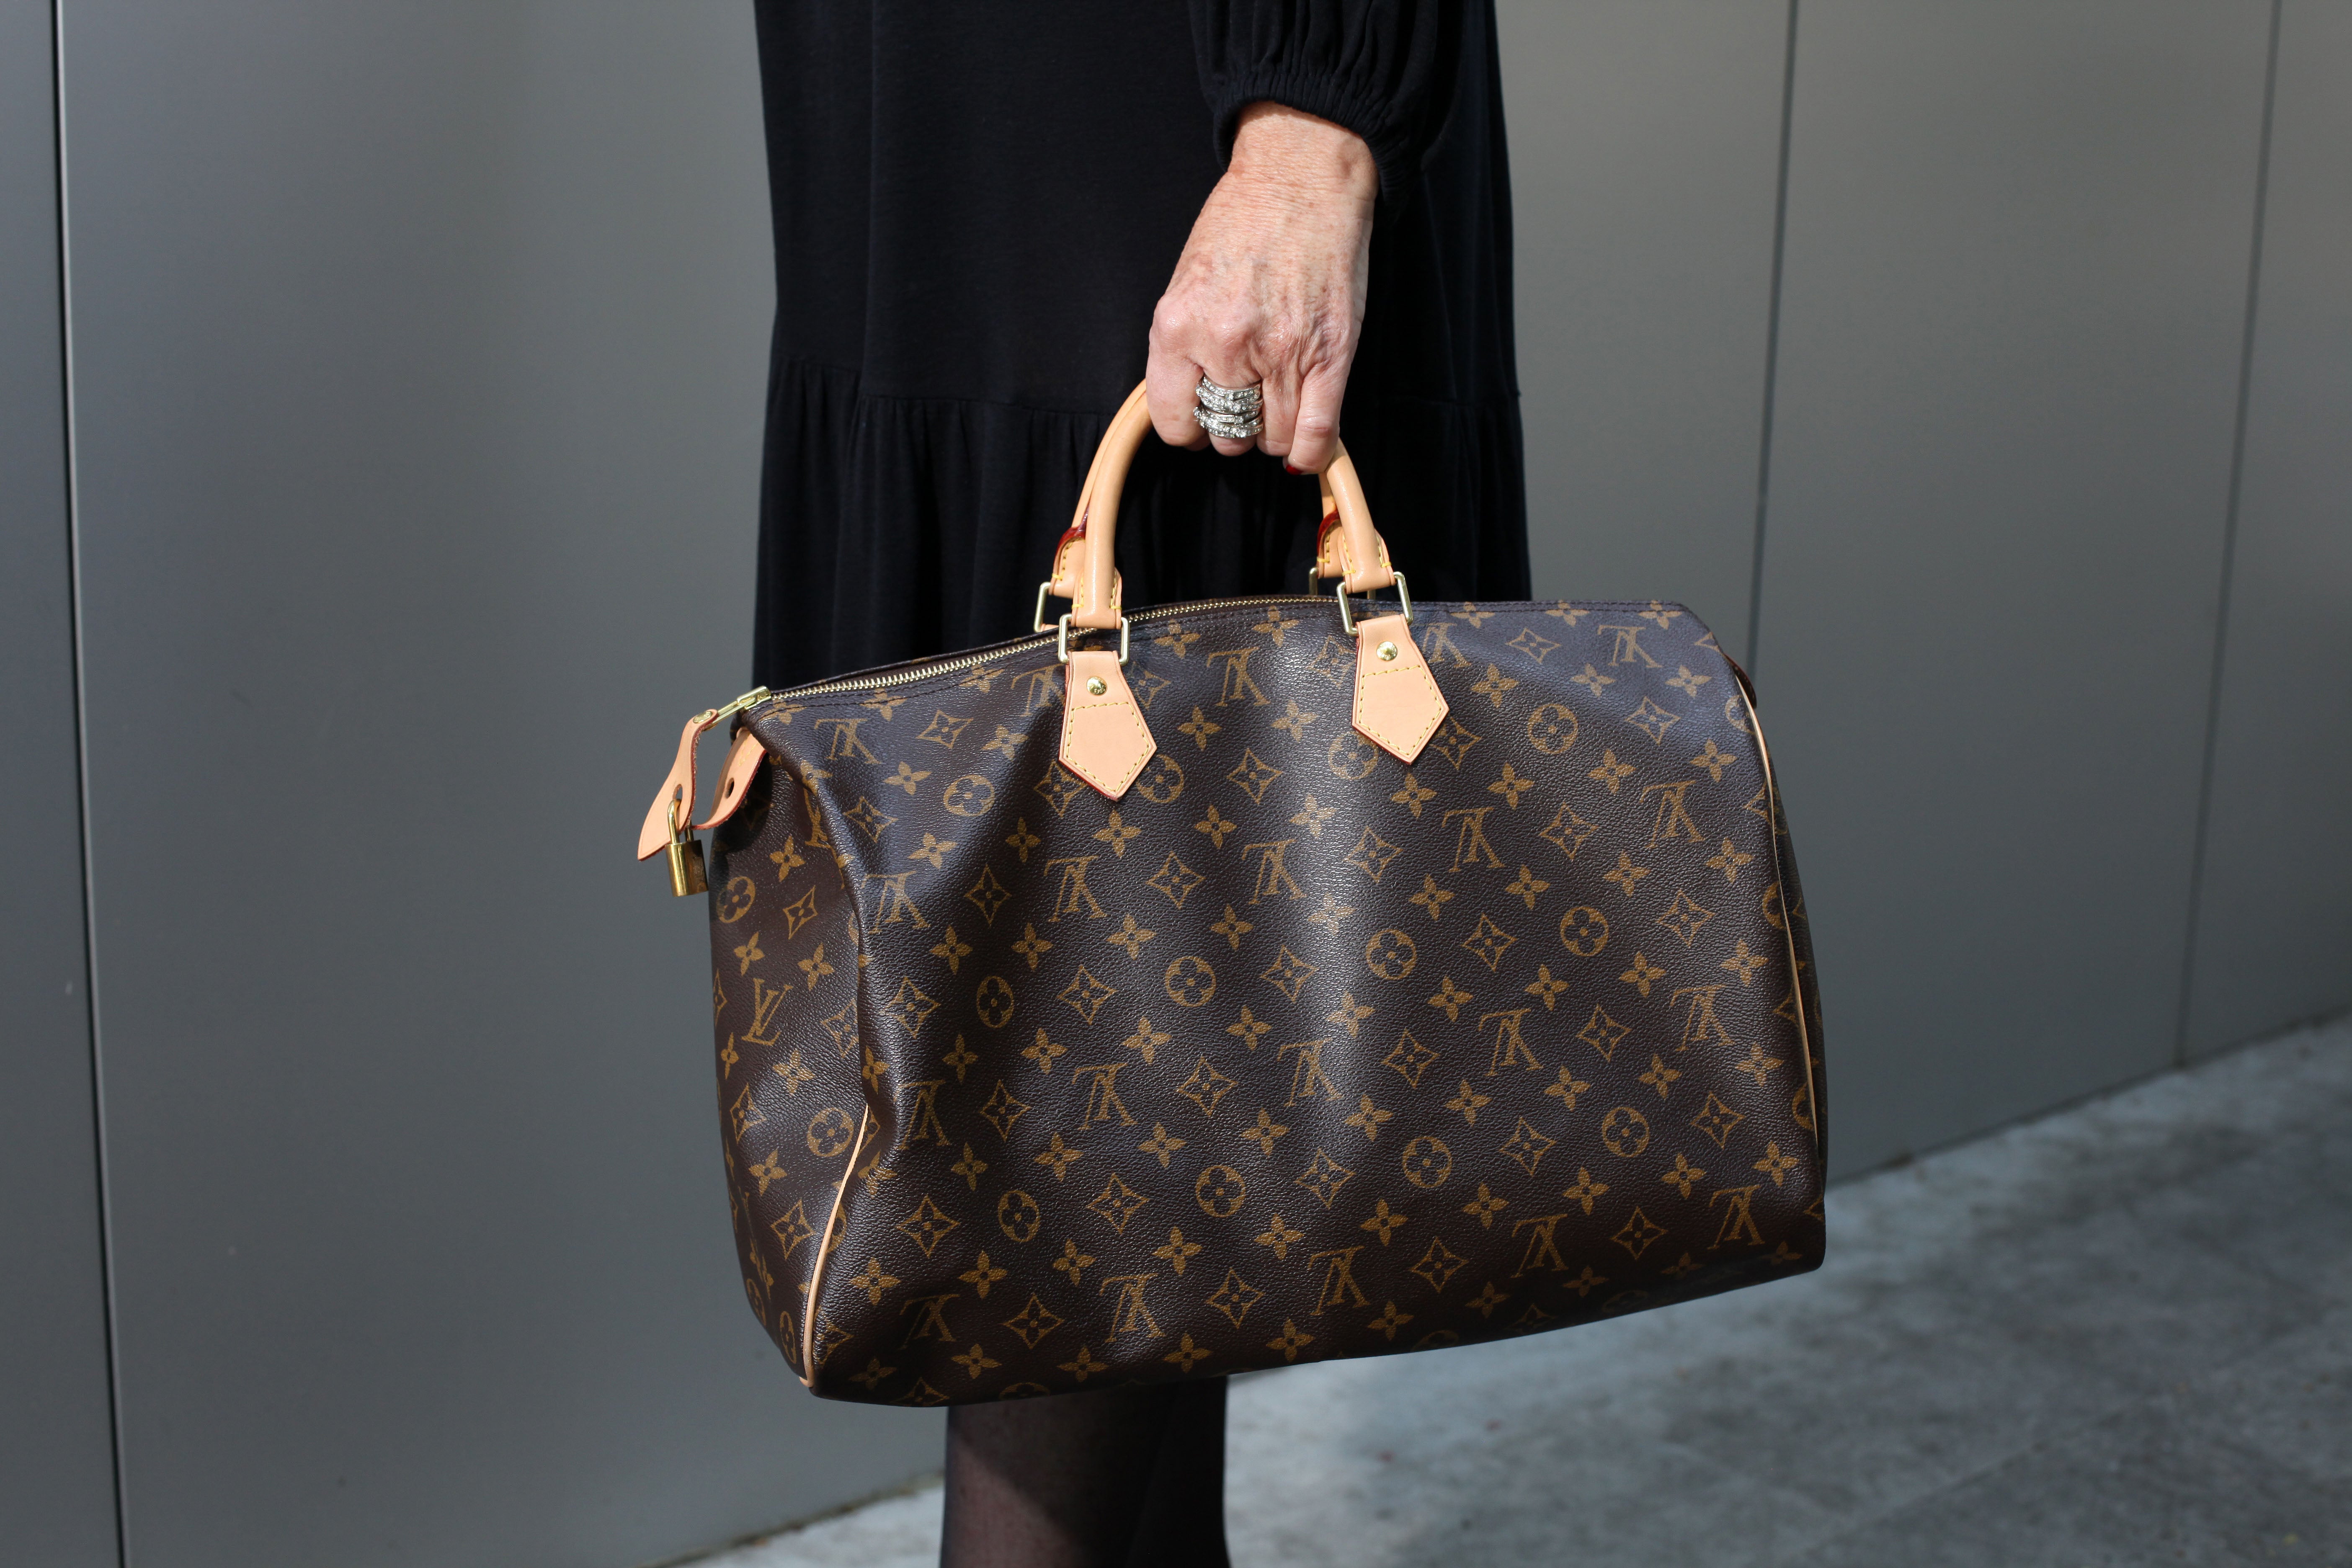 Louis Vuitton turns 200: These are the luxury fashion house's most